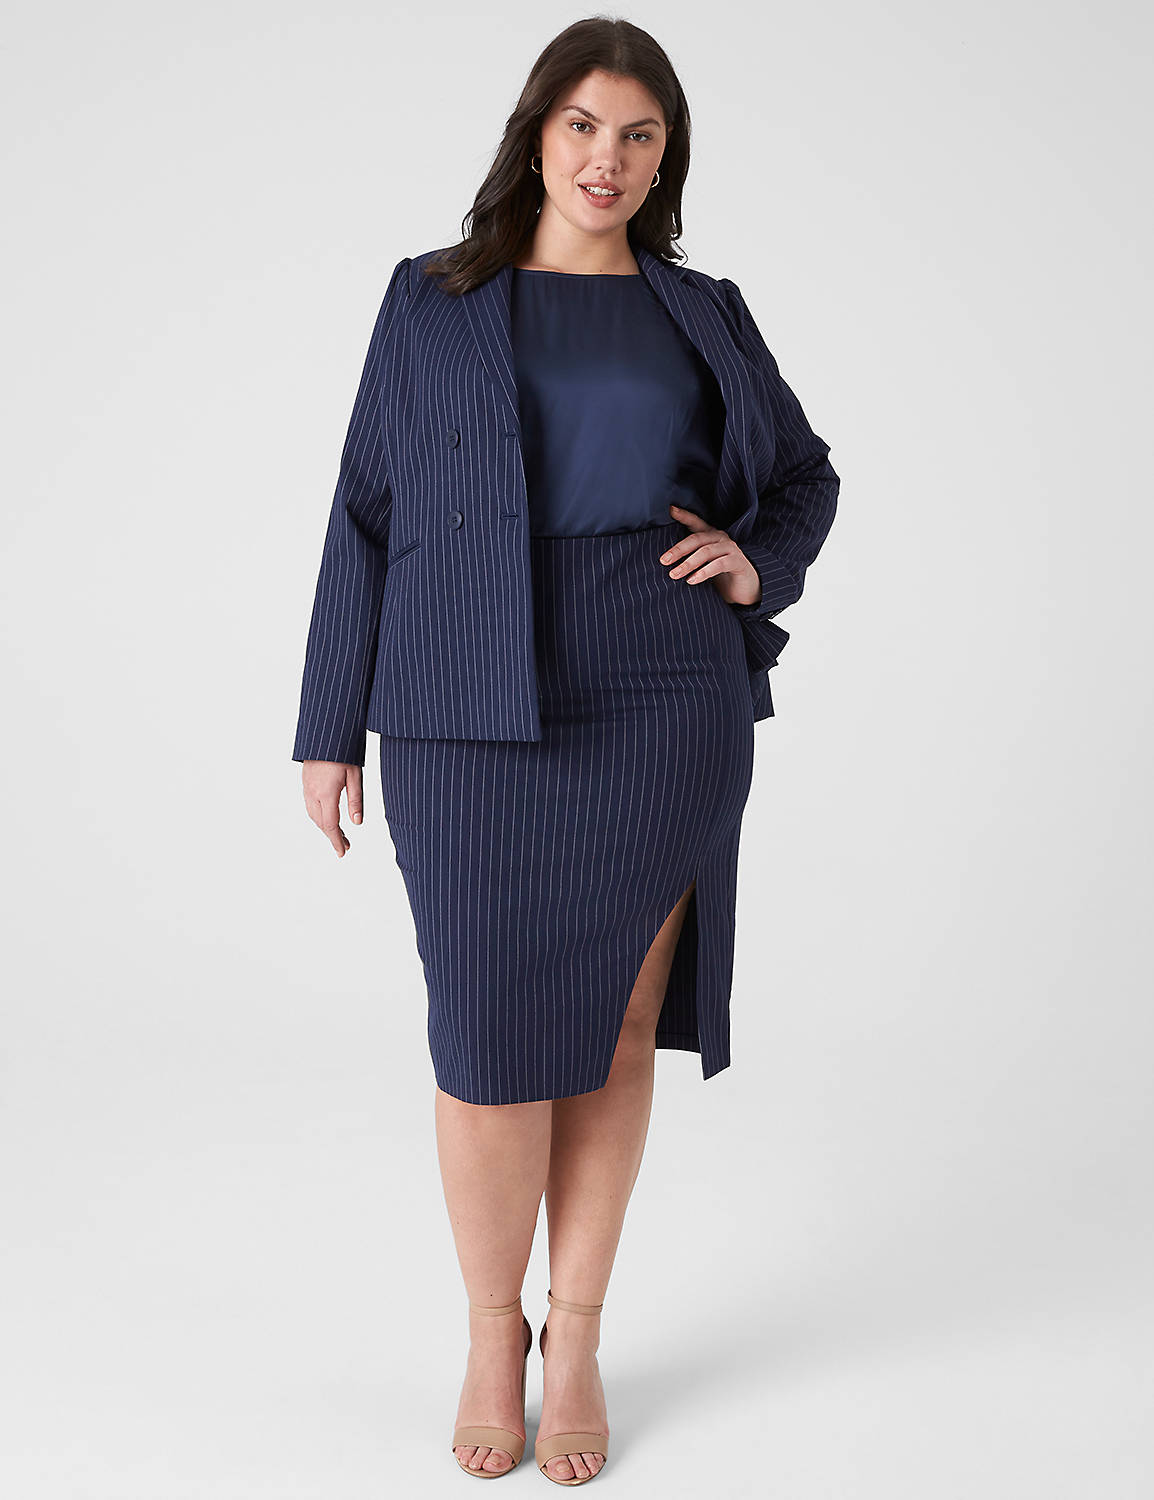 Pinstriped Bodycon with Belt 113587 Product Image 3